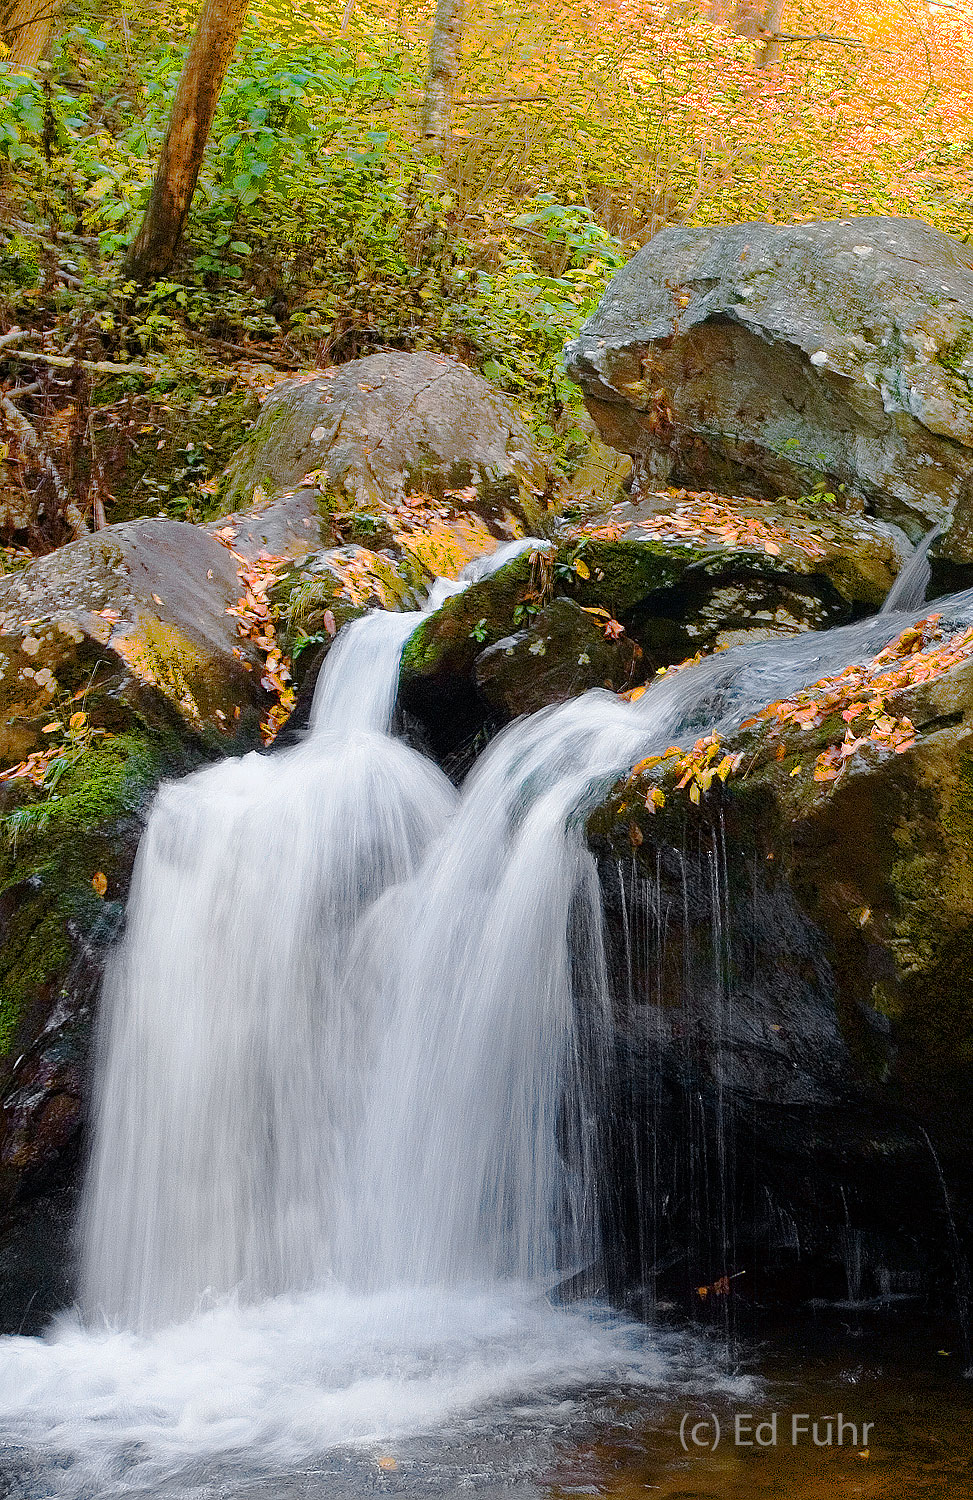 A small but beautiful falls lies just below Dark Hollow Falls, surrounded by autumn's colorful forest.